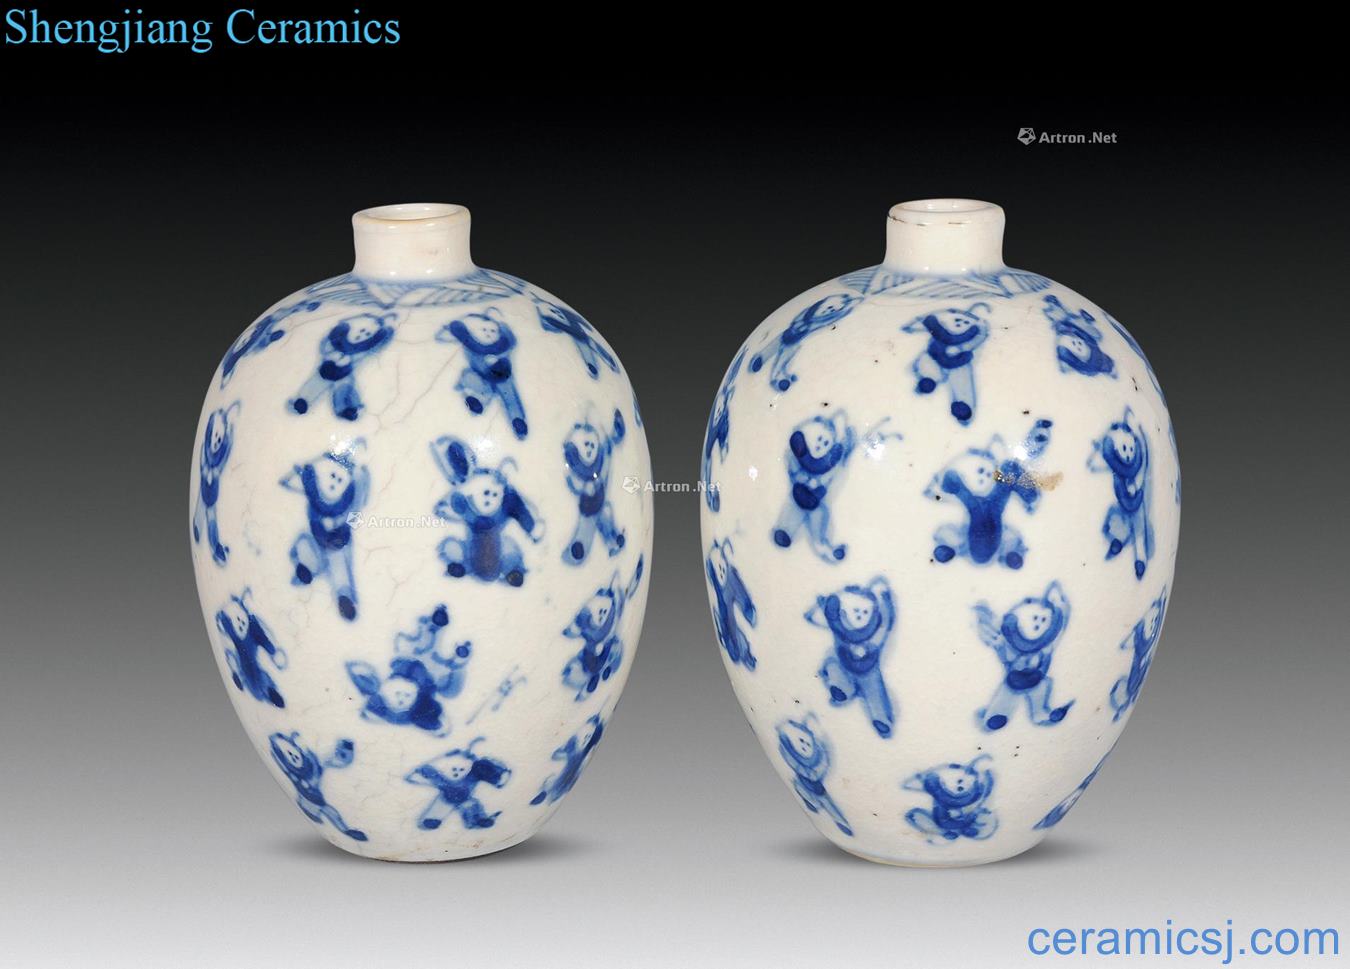 The qing emperor kangxi simmer figure blue-and-white porcelain the ancient philosophers POTS (a)